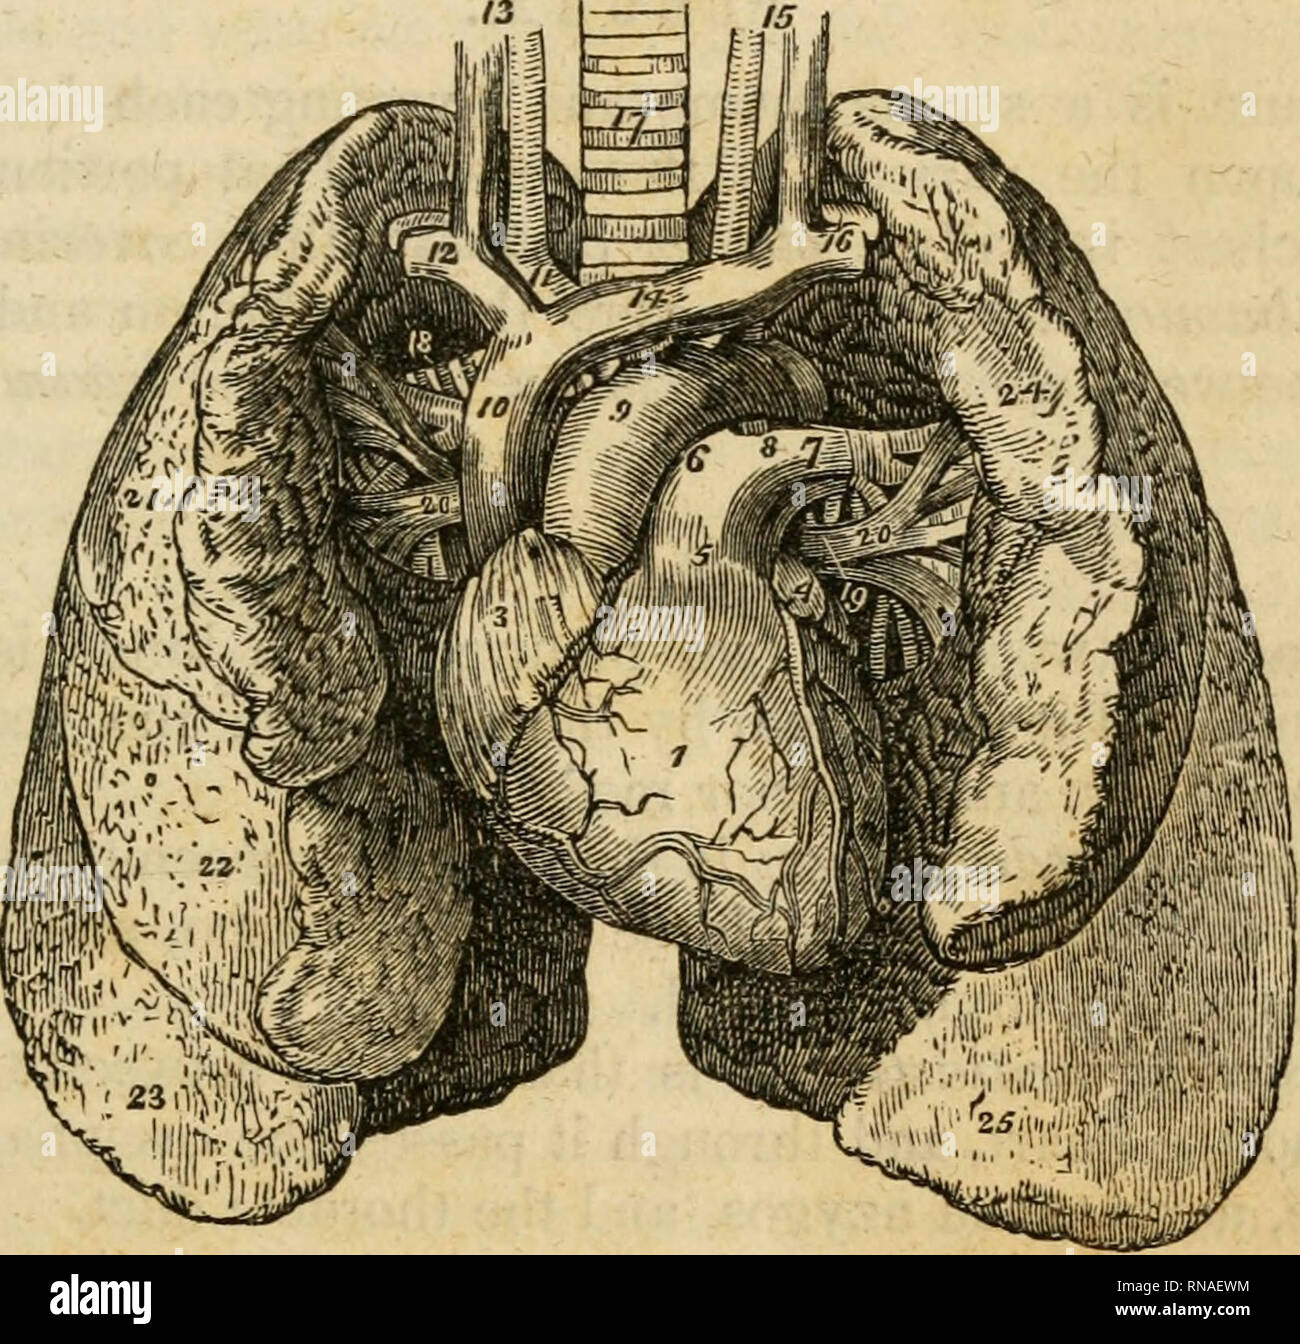 . An analytical compendium of the various branches of medical science, for the use and examination of students. Anatomy; Physiology; Surgery; Obstetrics; Medicine; Materia Medica. THE LUNGS. 129 nular in its structure, has no excretory tube, but very large lym- phatic vessels. It. is supplied by the superior and inferior thyroid arteries. It is sometimes much enlarged, constituting bronchocele or goitre. THE LUNGS. The lungs are the organs of respiration properly; they are two in number, and situated in the thorax, placed side by side, being separated from the abdomen by the diaphragm. The siz Stock Photo